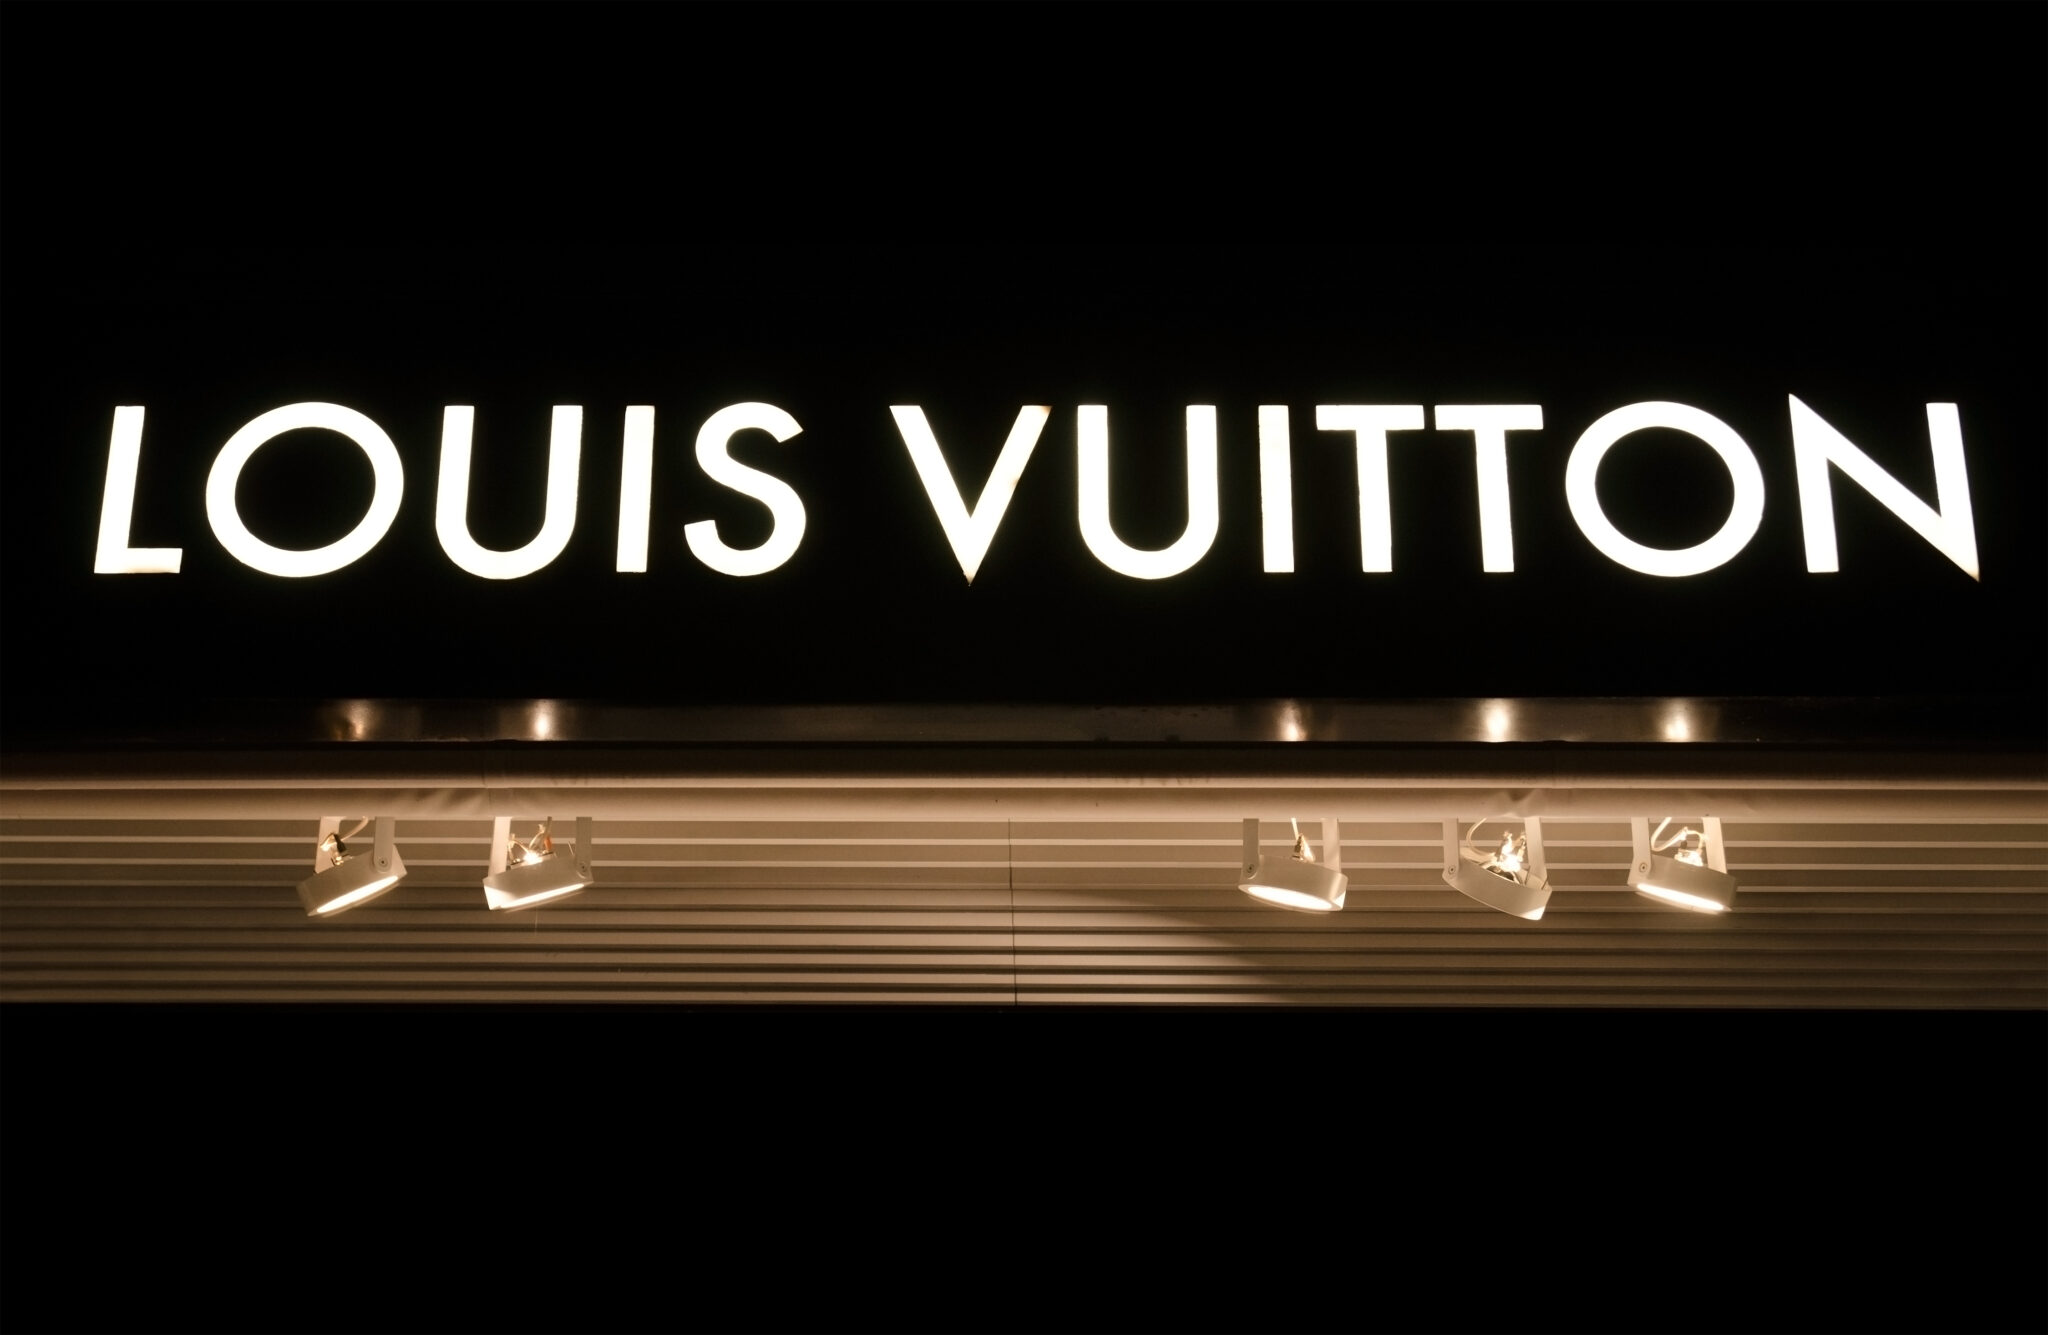 Detail of brand logo of a shop of "Louis Vuitton", Marbella, Spain.